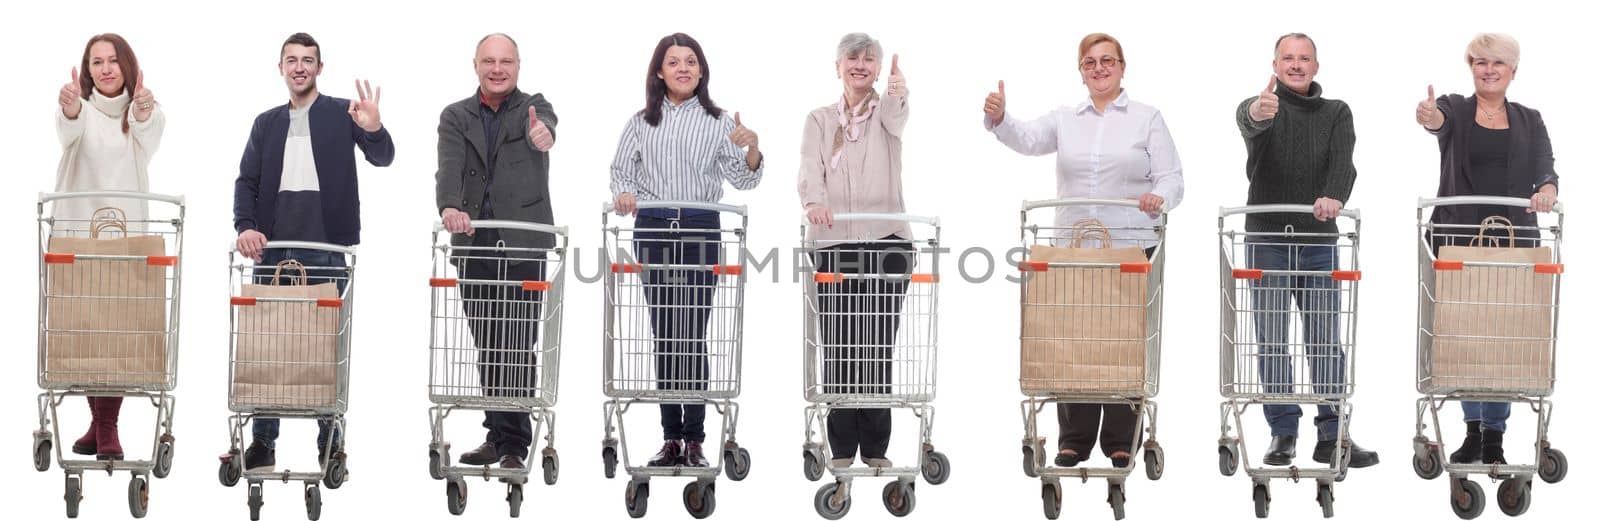 group of people with shopping cart showing thumbs up by asdf